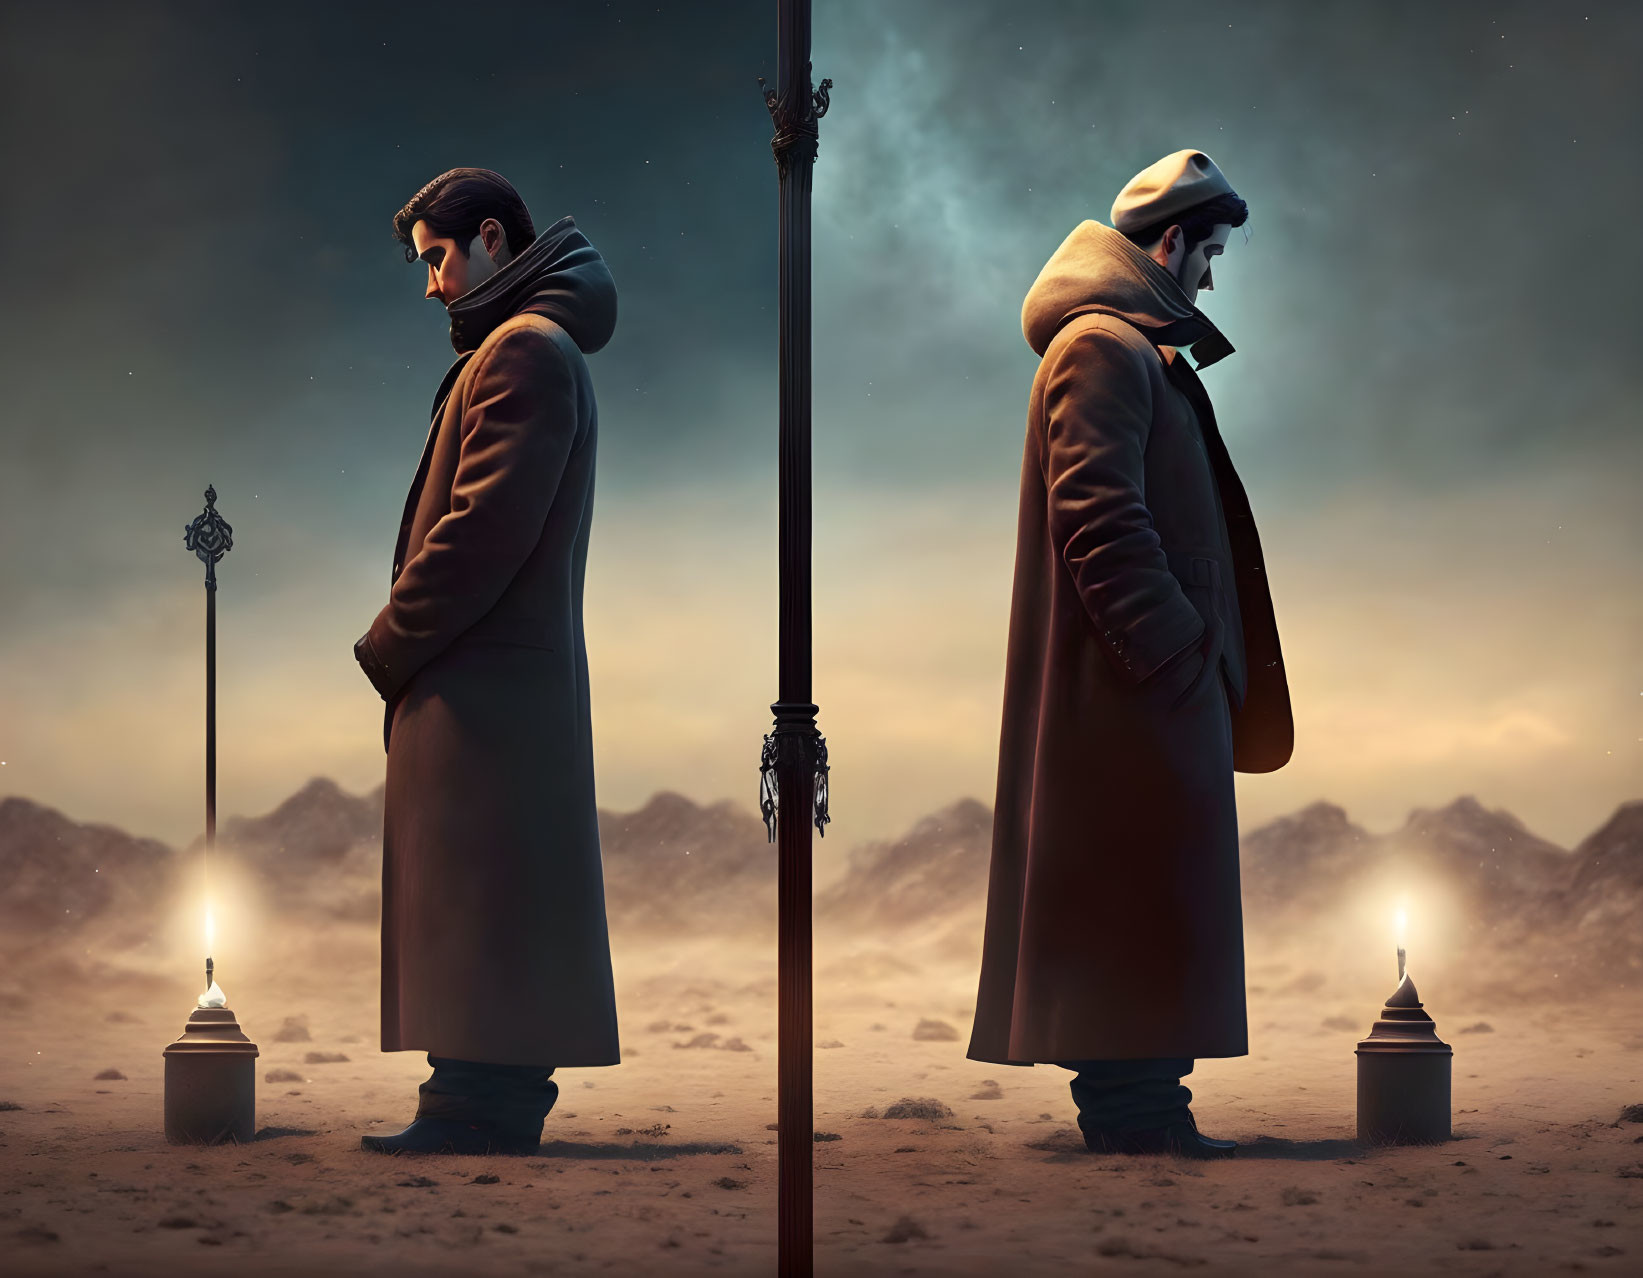 Man in Coat Mirrored Back-to-Back at Dusk Sky with Lamppost